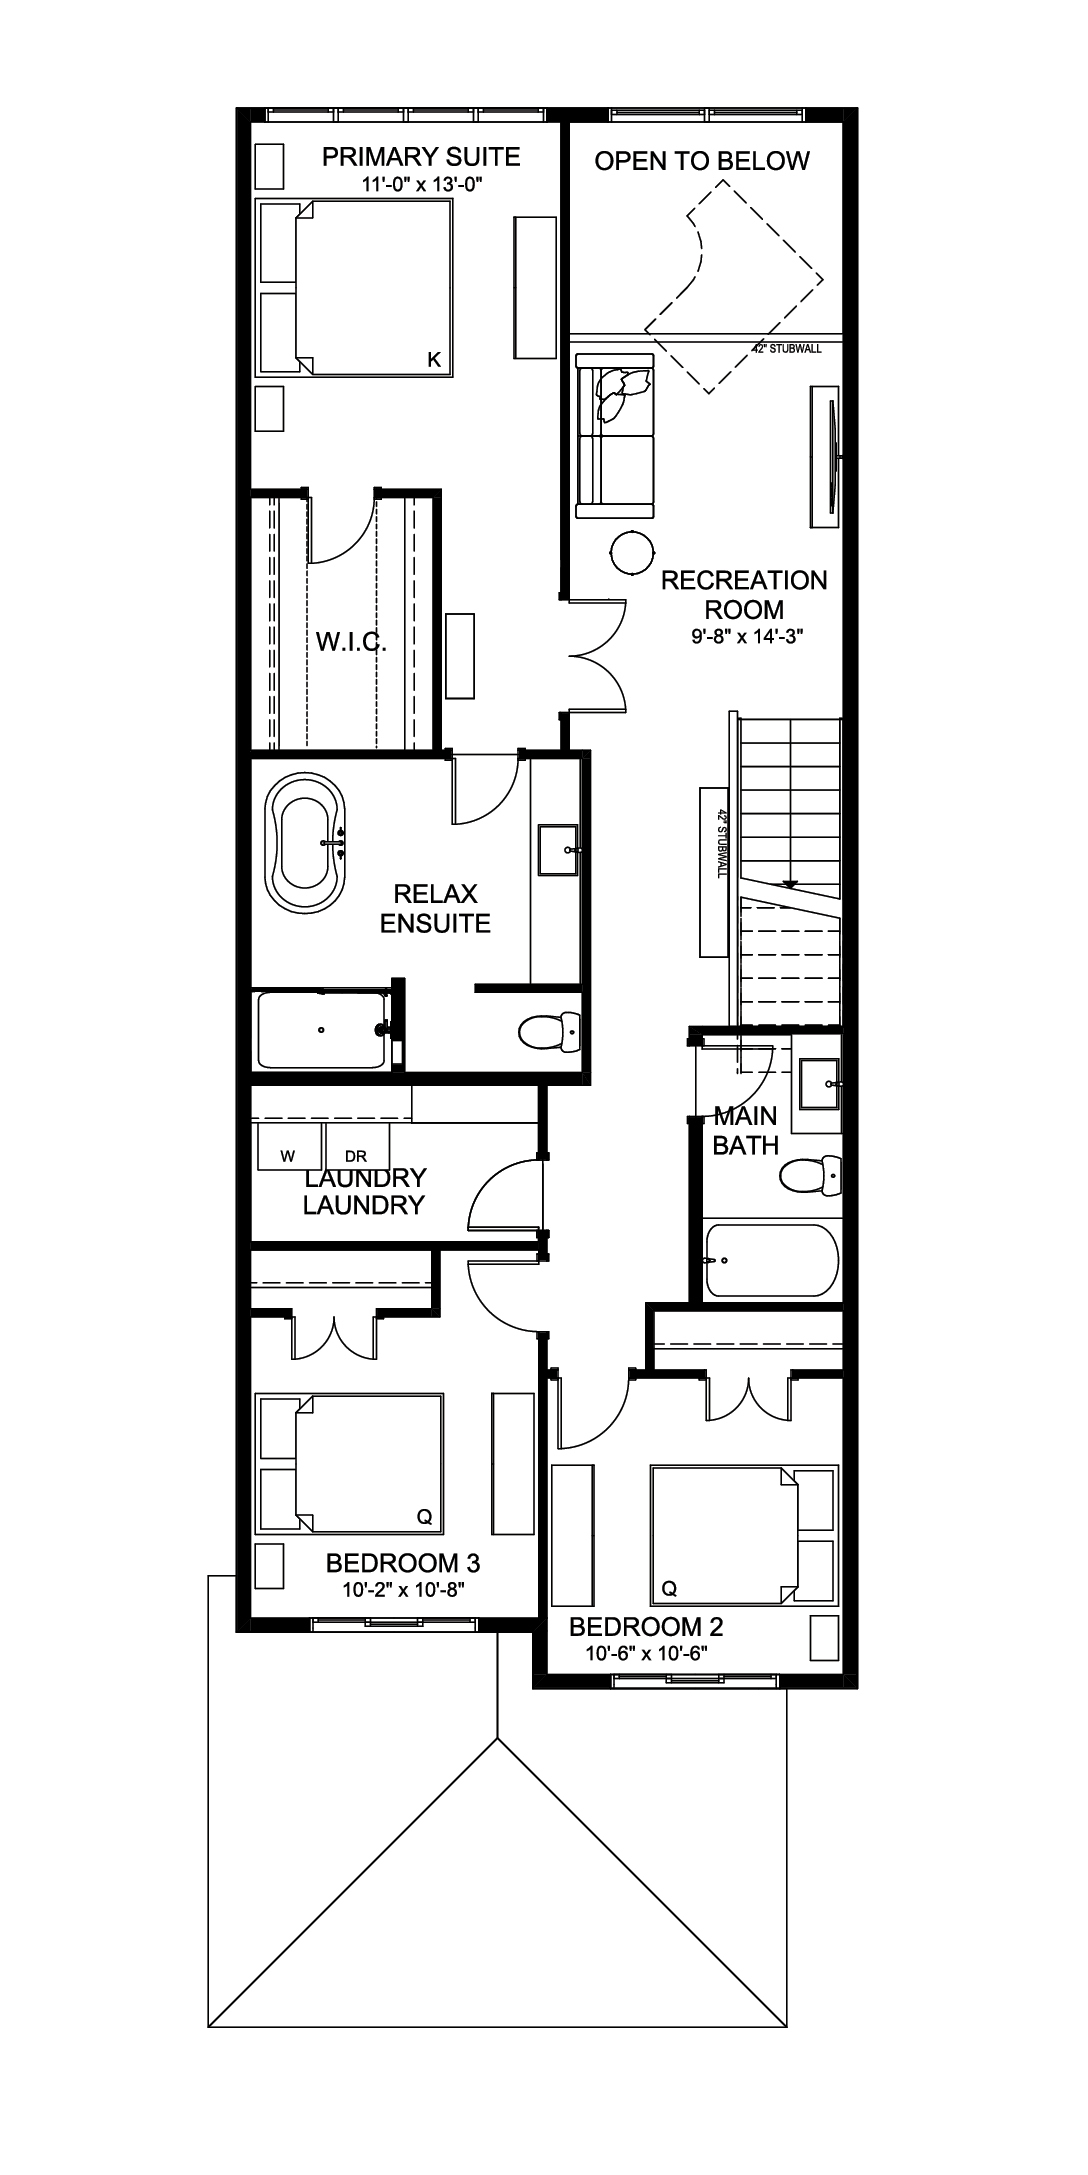  Entertain Play 22  Floor Plan of Woodhaven Edgemont with undefined beds